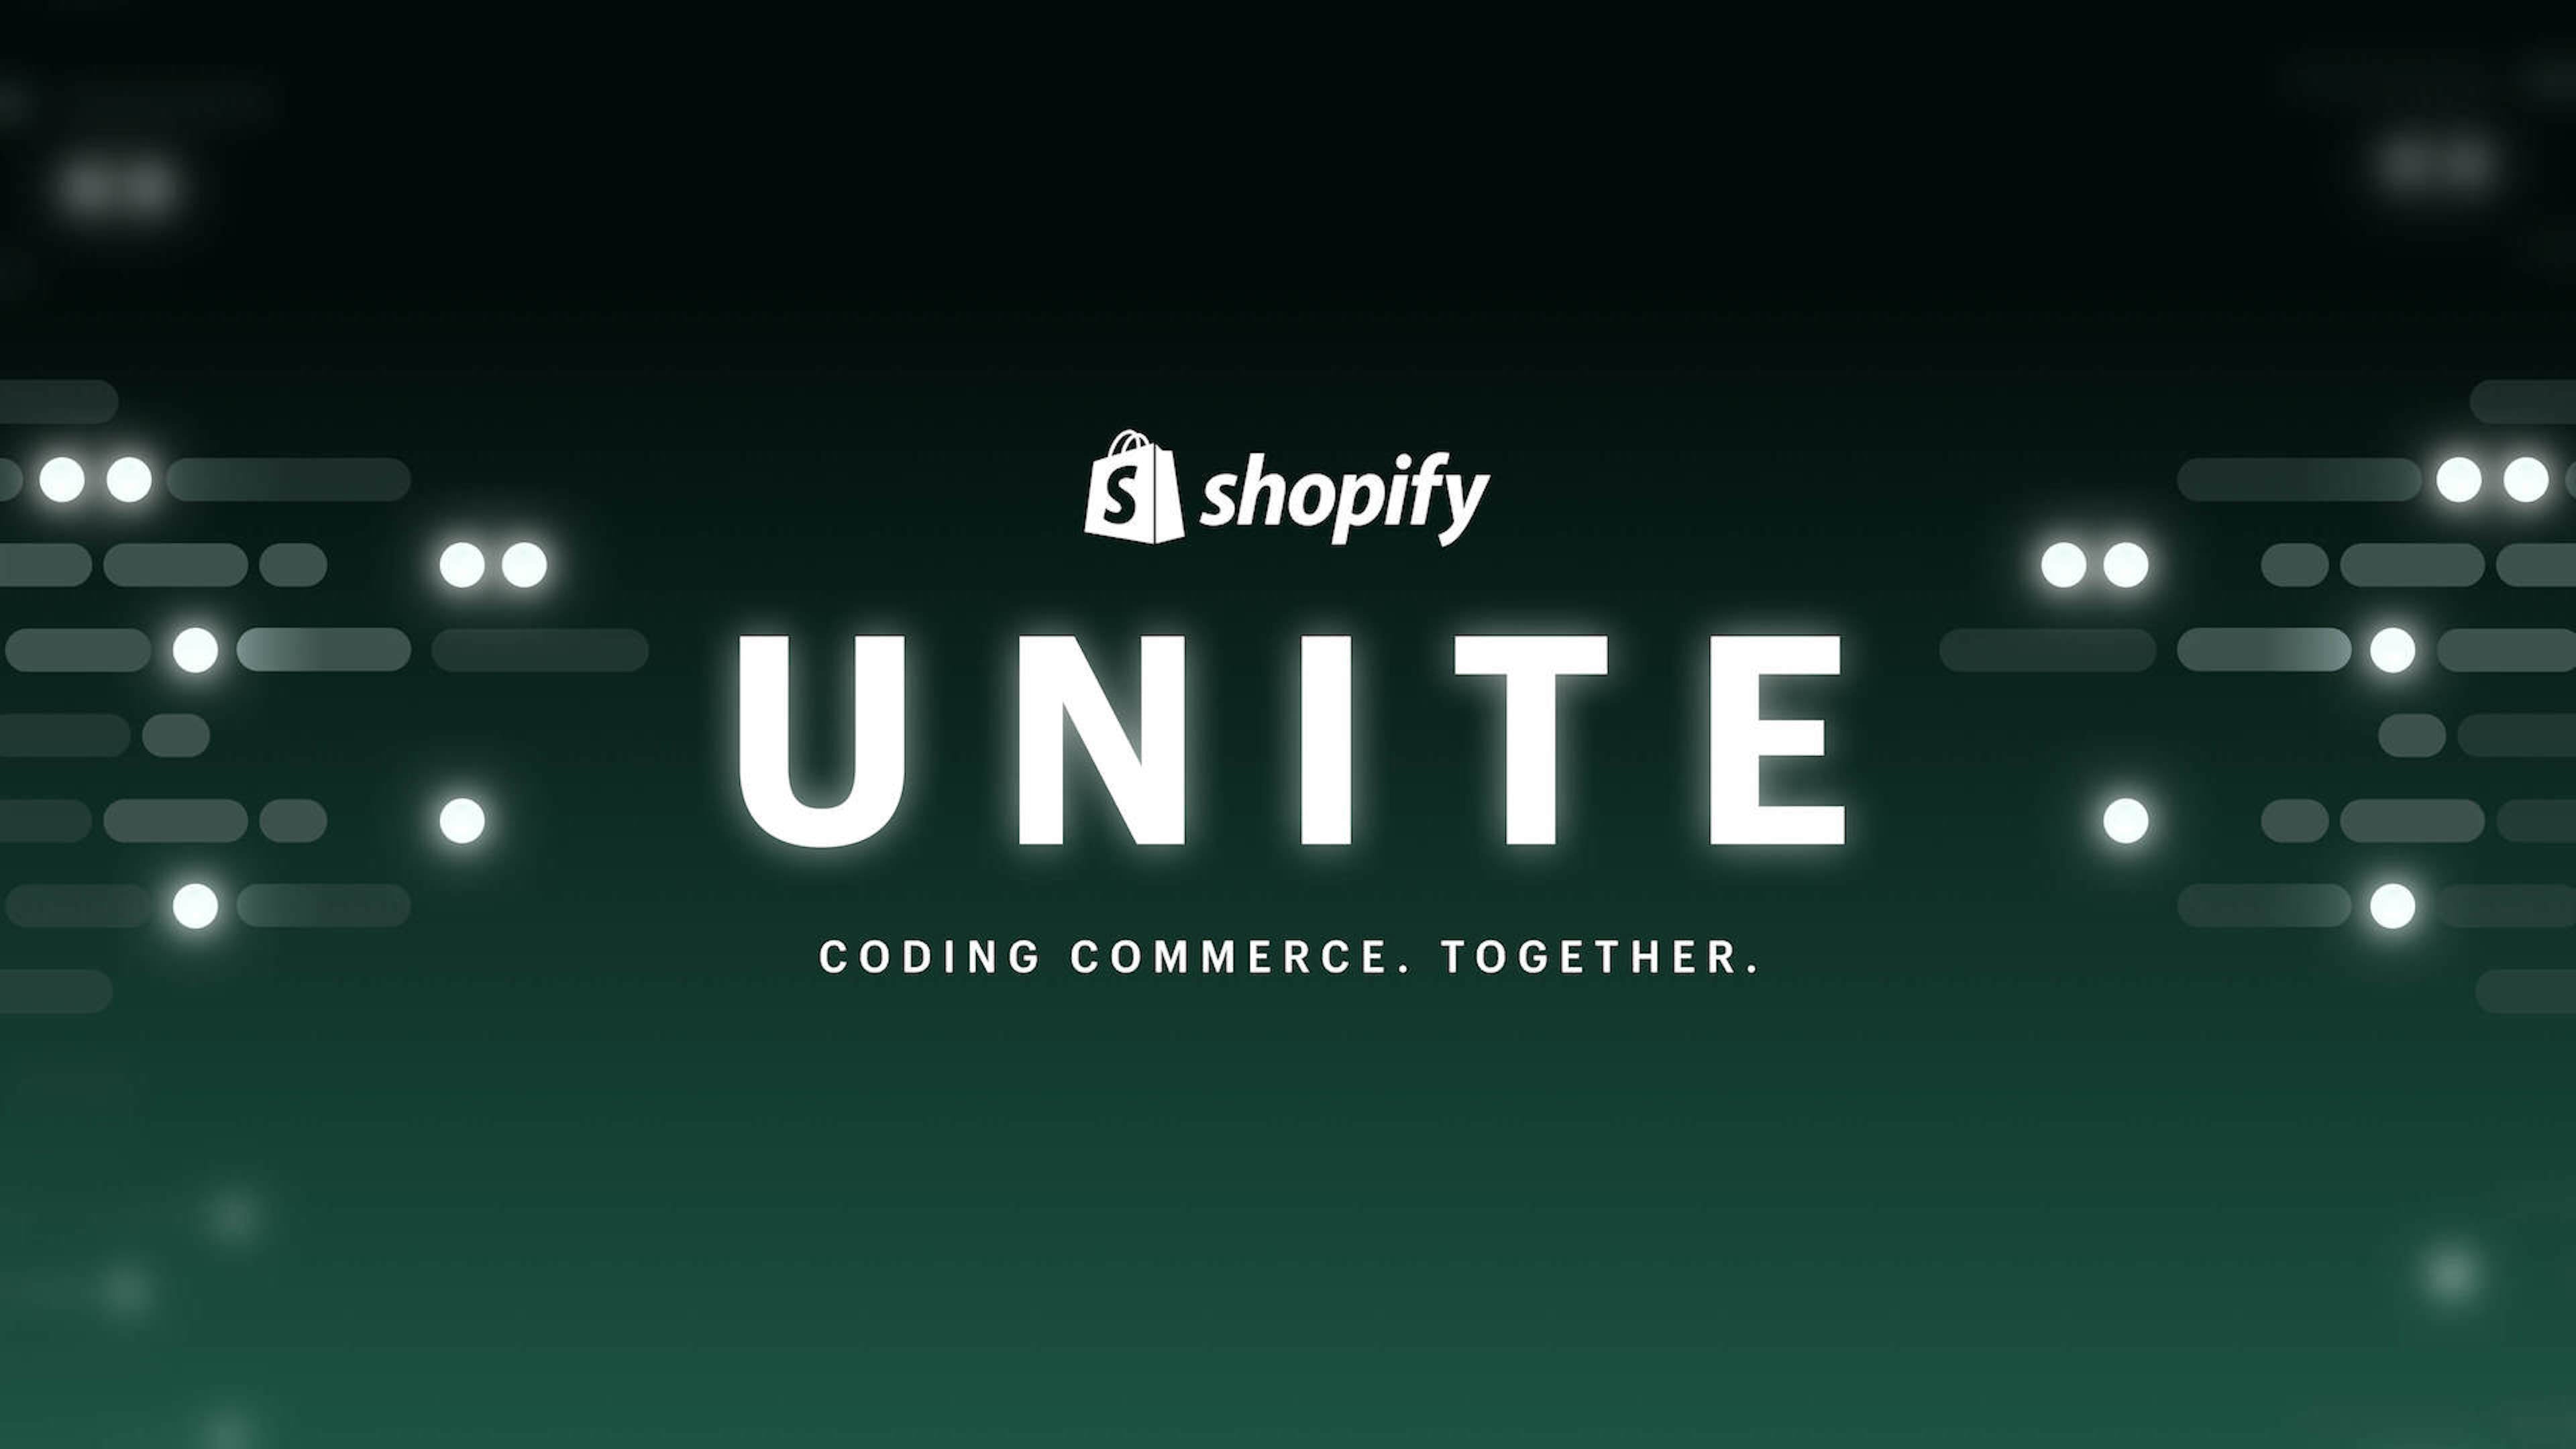 Shopify Unite 2021: Coding Commerce Together